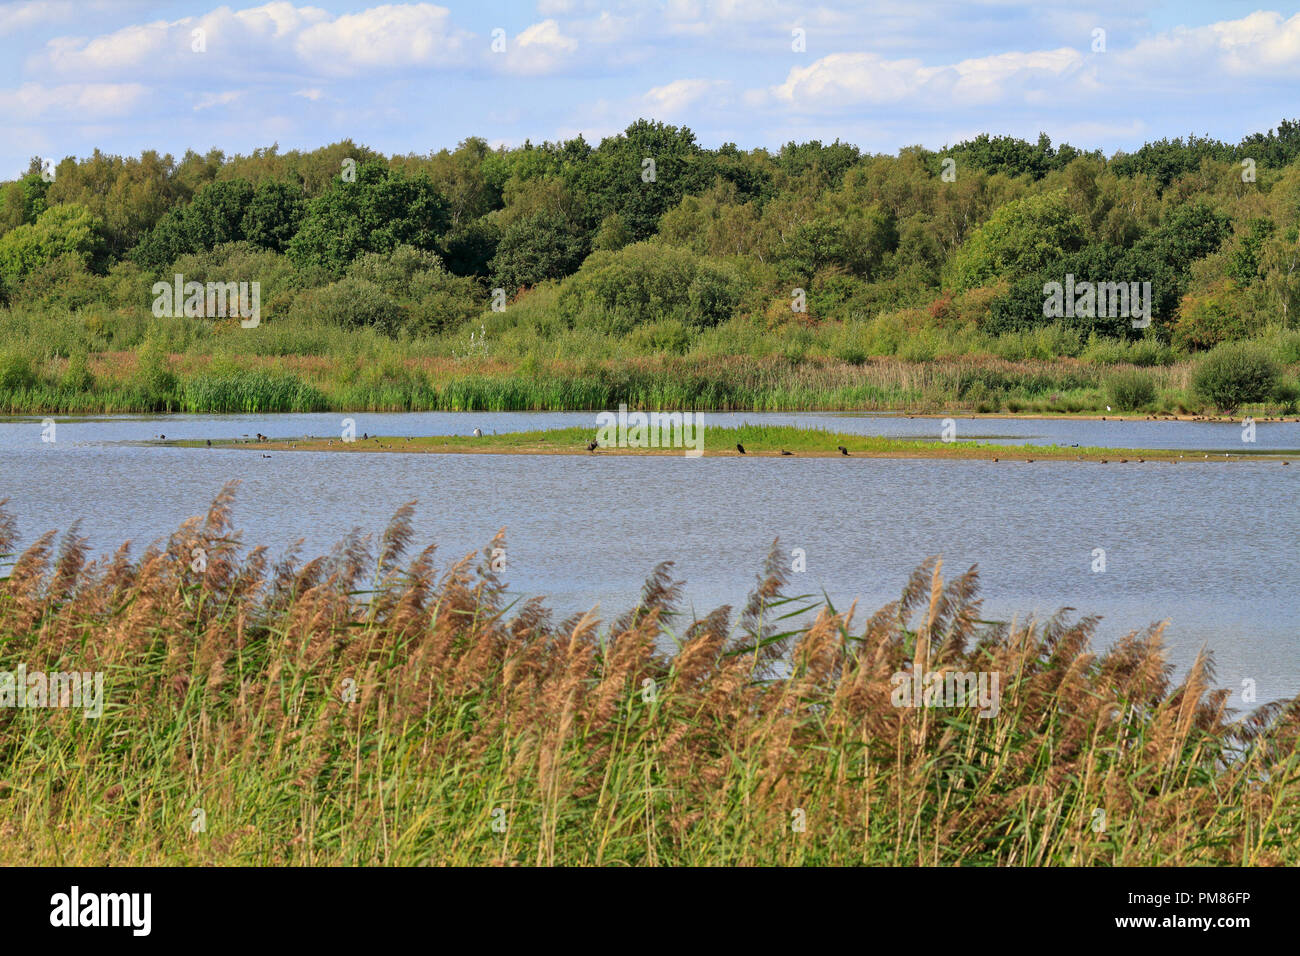 Reedbeds at Potteric Carr Yorkshire Wildlife Trust Reserve, Doncaster, South Yorkshire, England, UK. Stock Photo